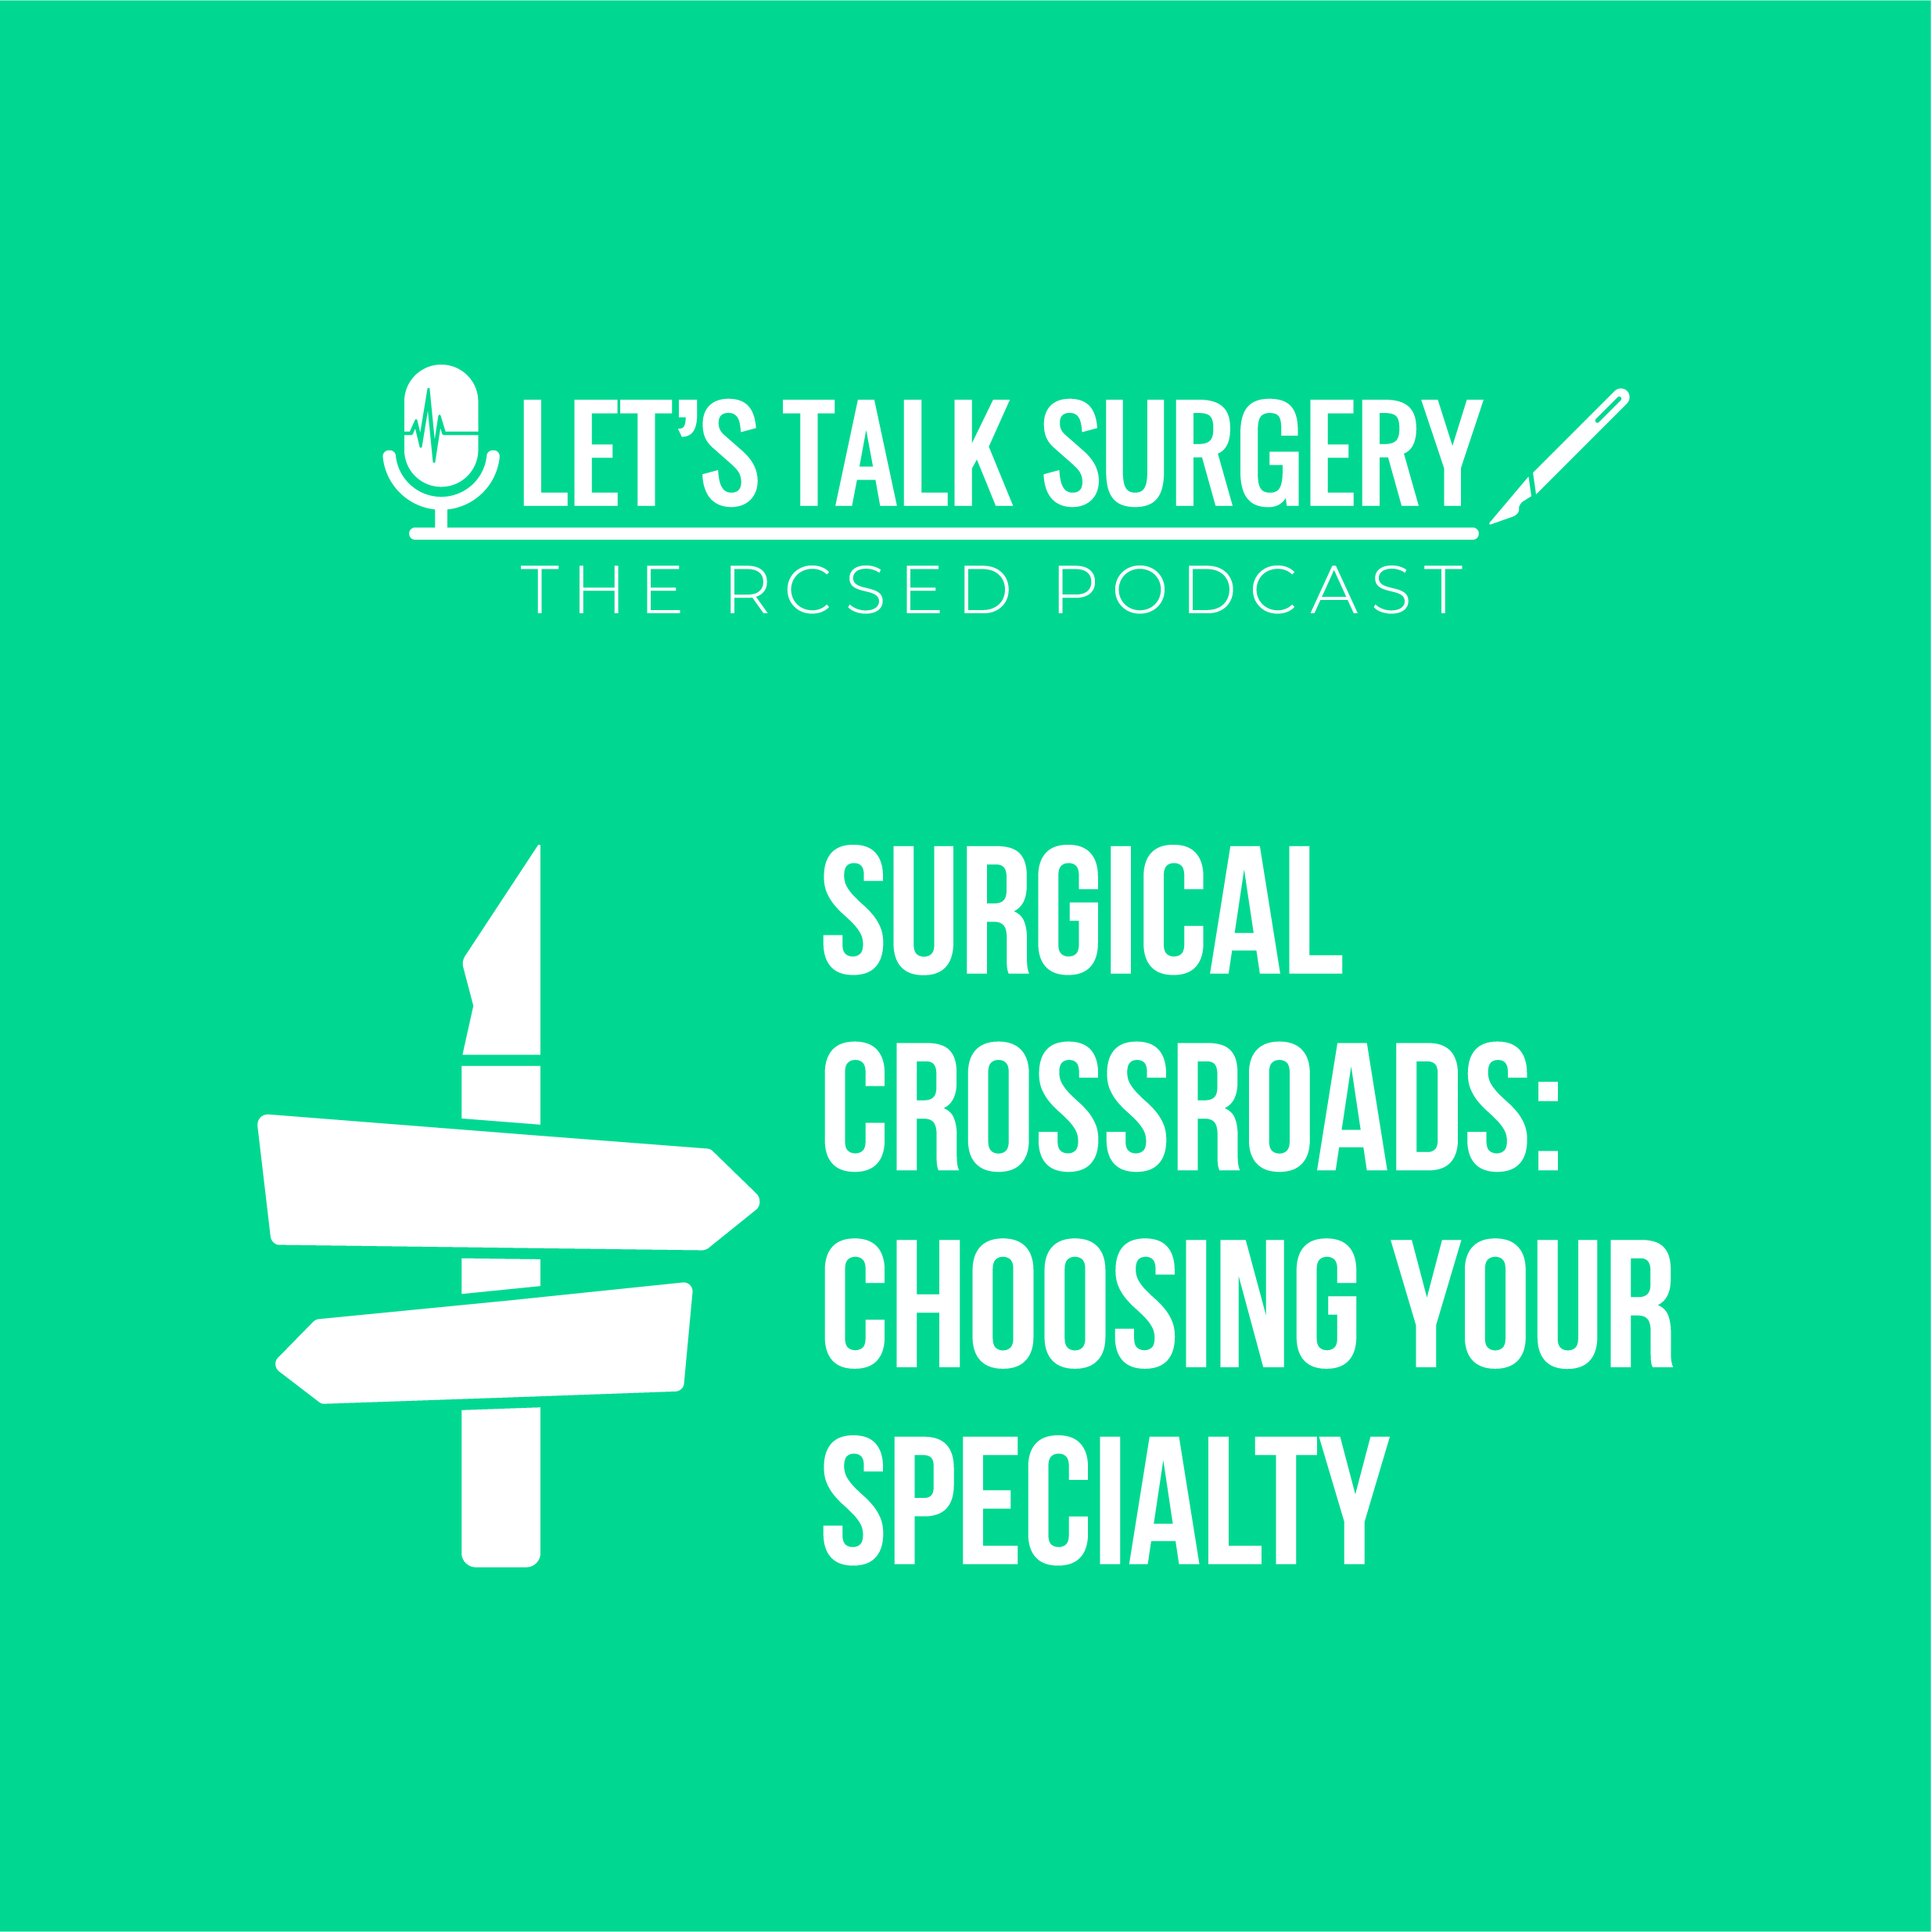 Let's Talk Surgery Podcast, Surgical Crossroads: "Choosing your specialty - the Plastic Surgery episode"